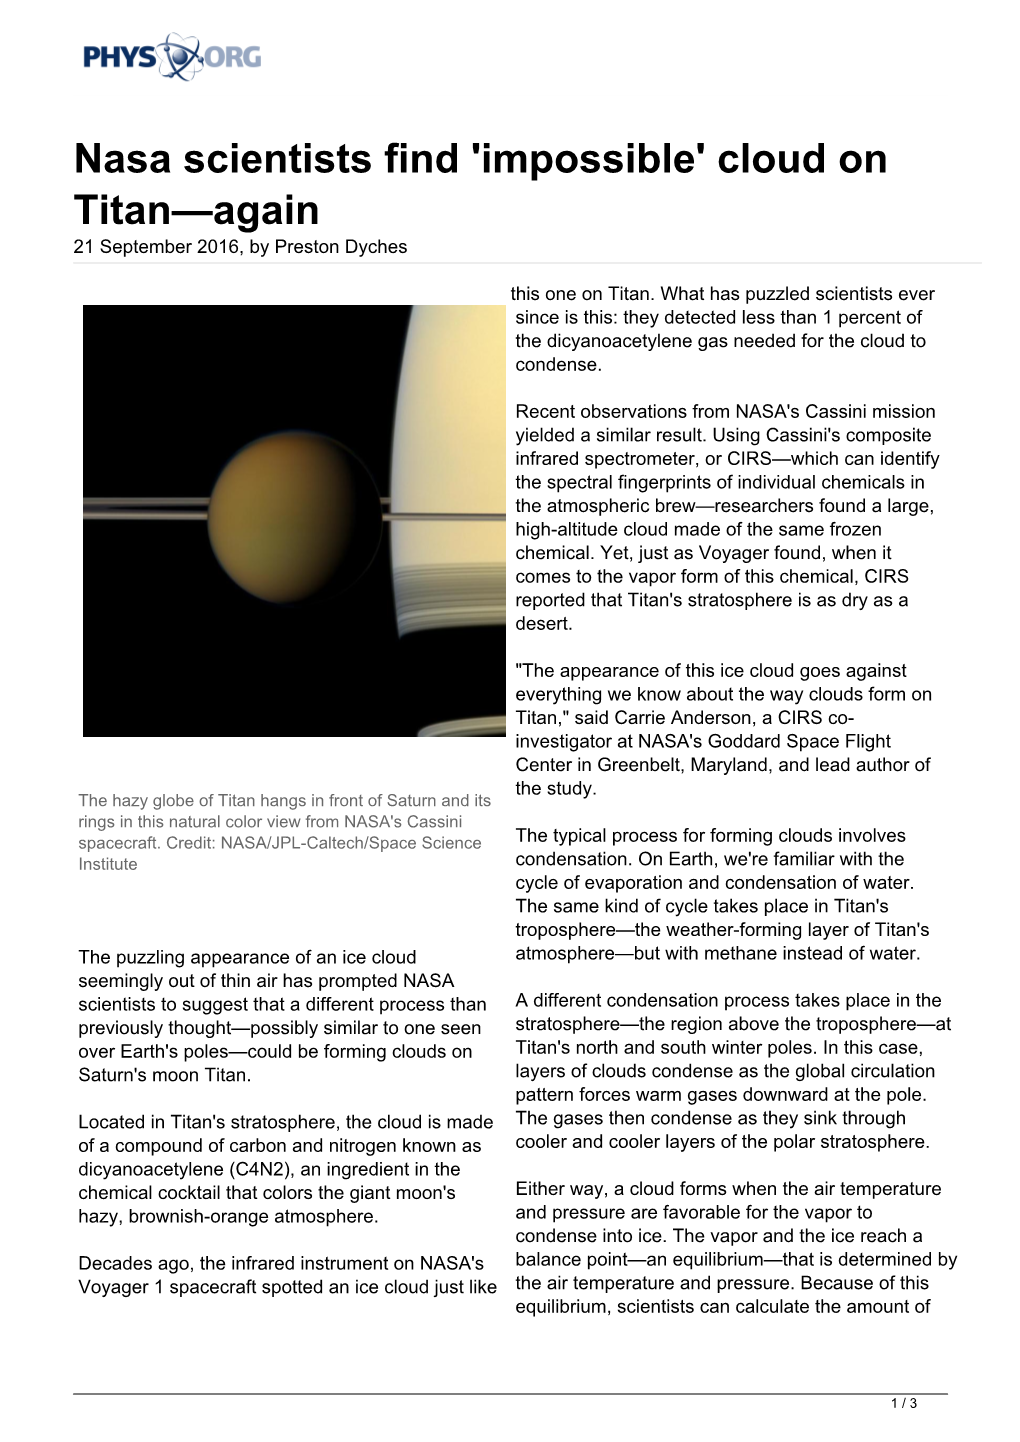 Nasa Scientists Find 'Impossible' Cloud on Titan—Again 21 September 2016, by Preston Dyches